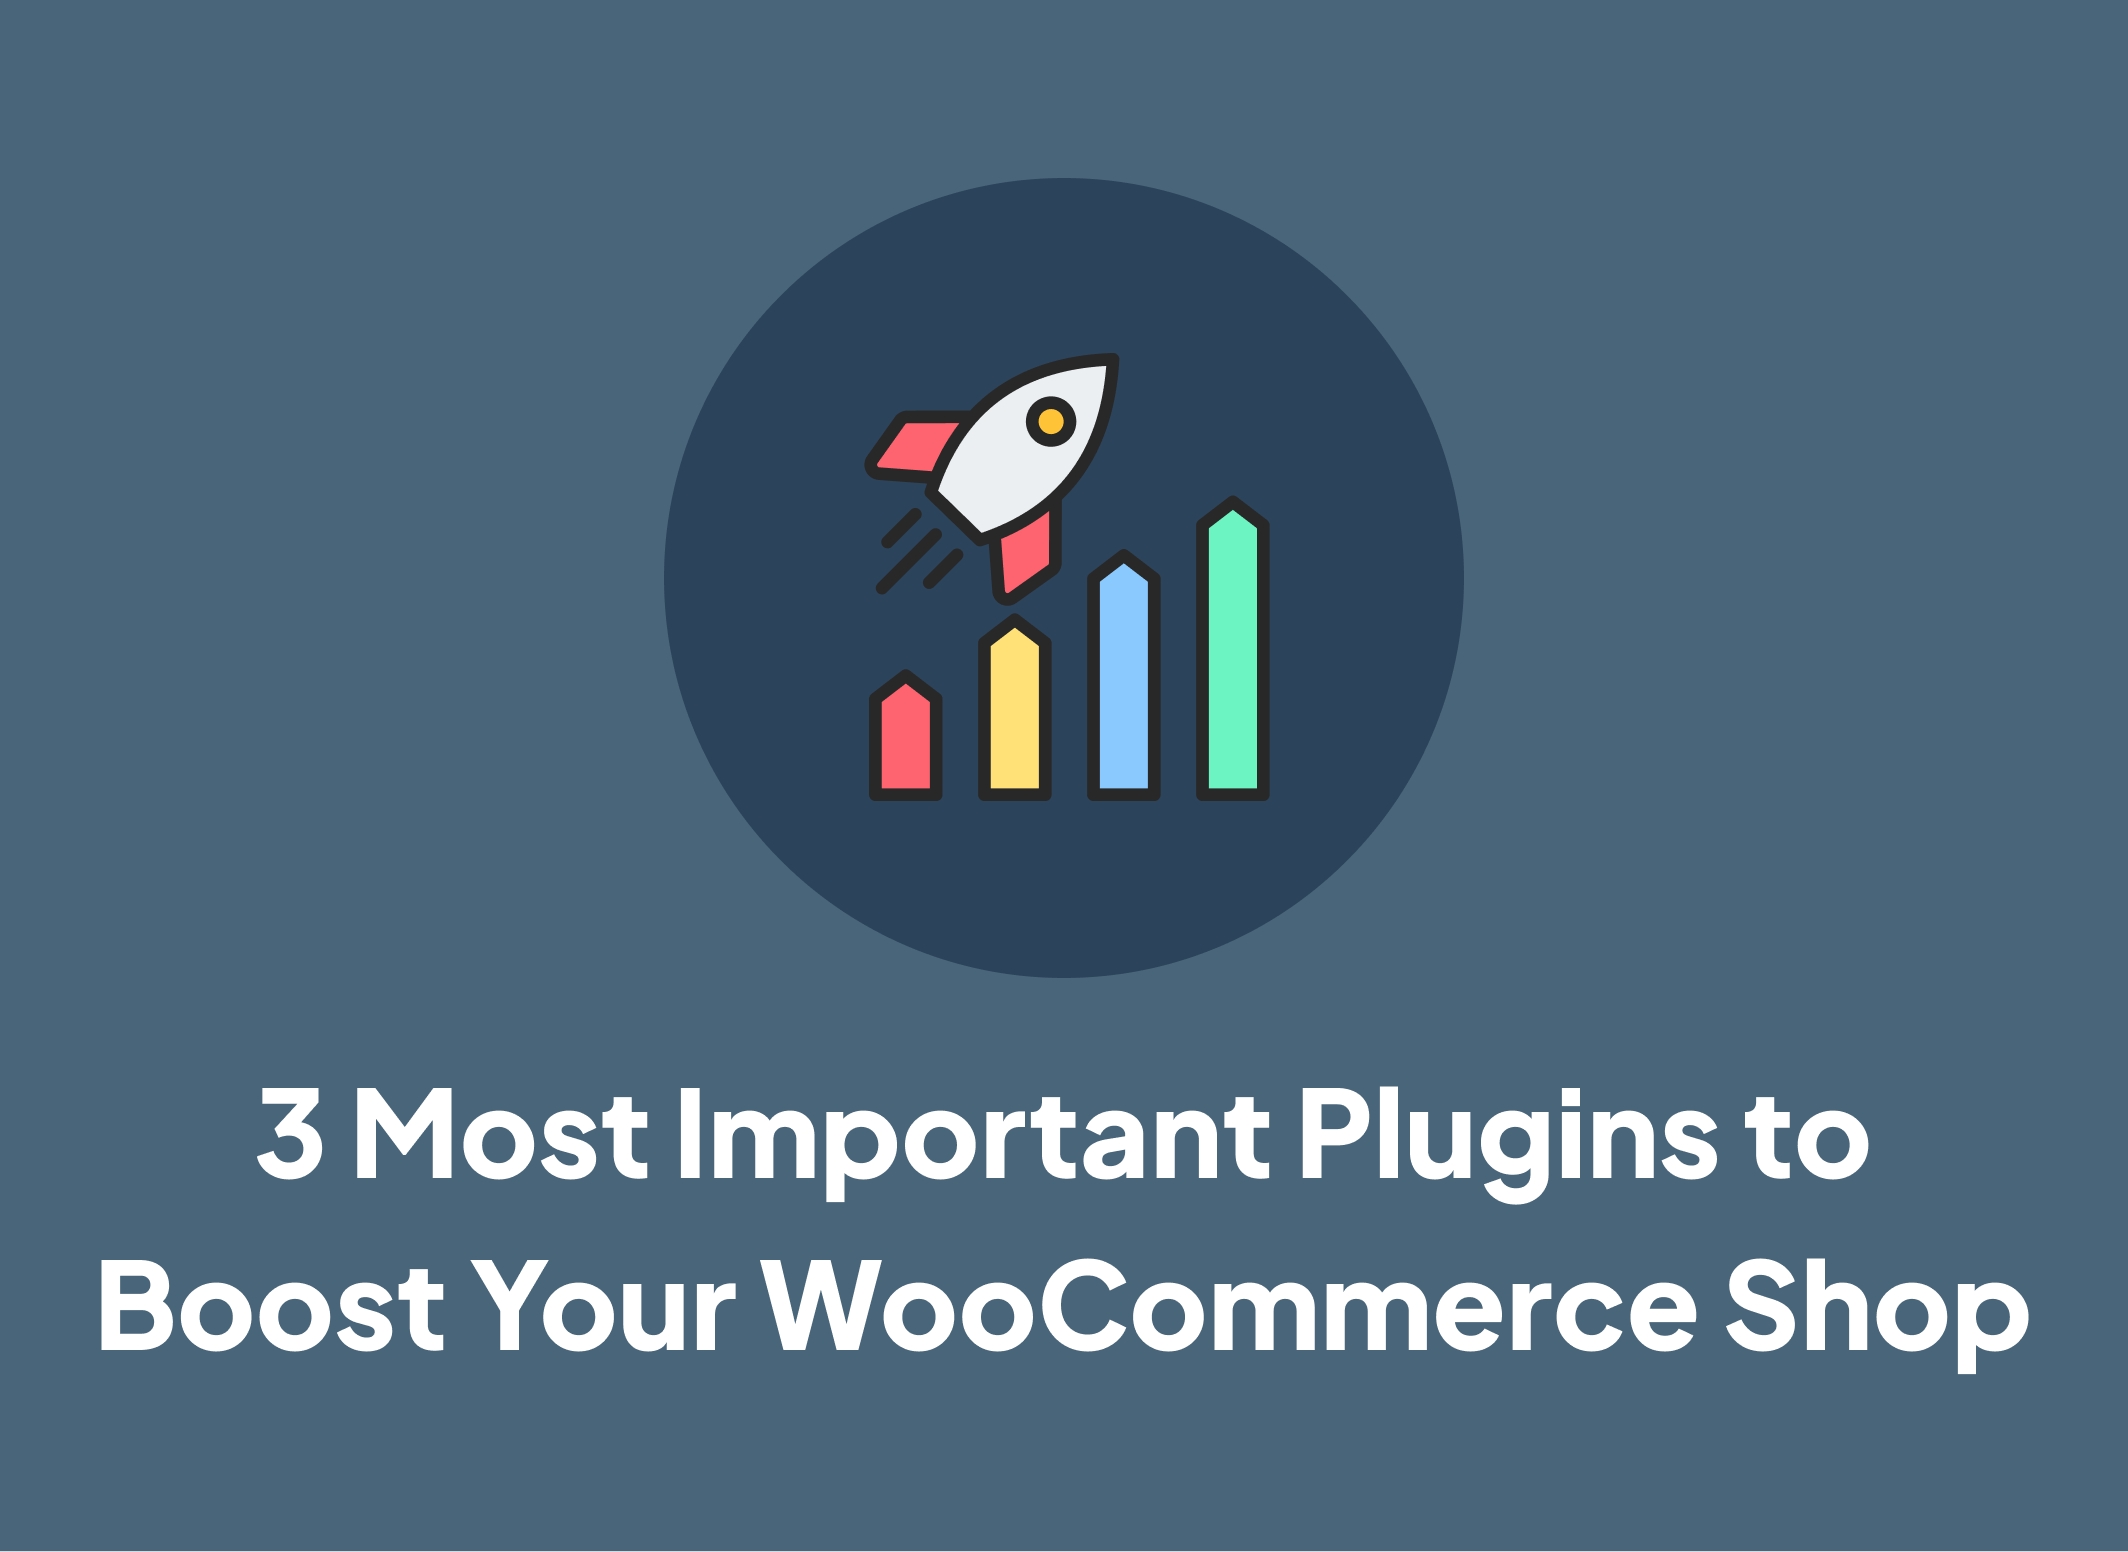 3 Most Important Plugins to Boost Your WooCommerce Shop